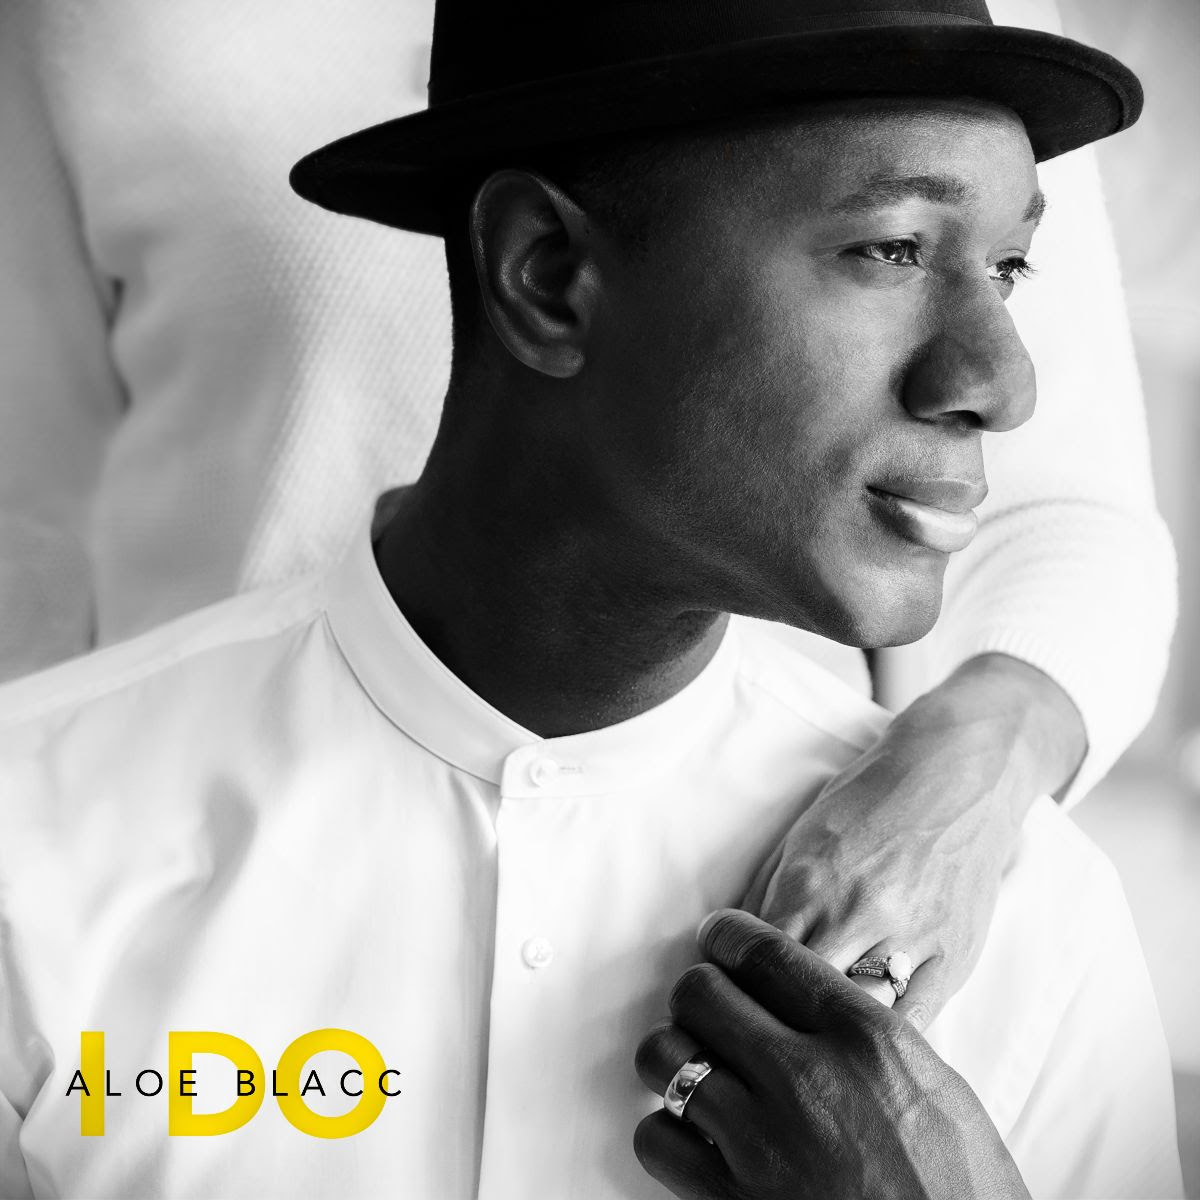 The romantic new release from Grammy nominated singer-songwriter, artist, Aloe Blacc, titled "I Do"